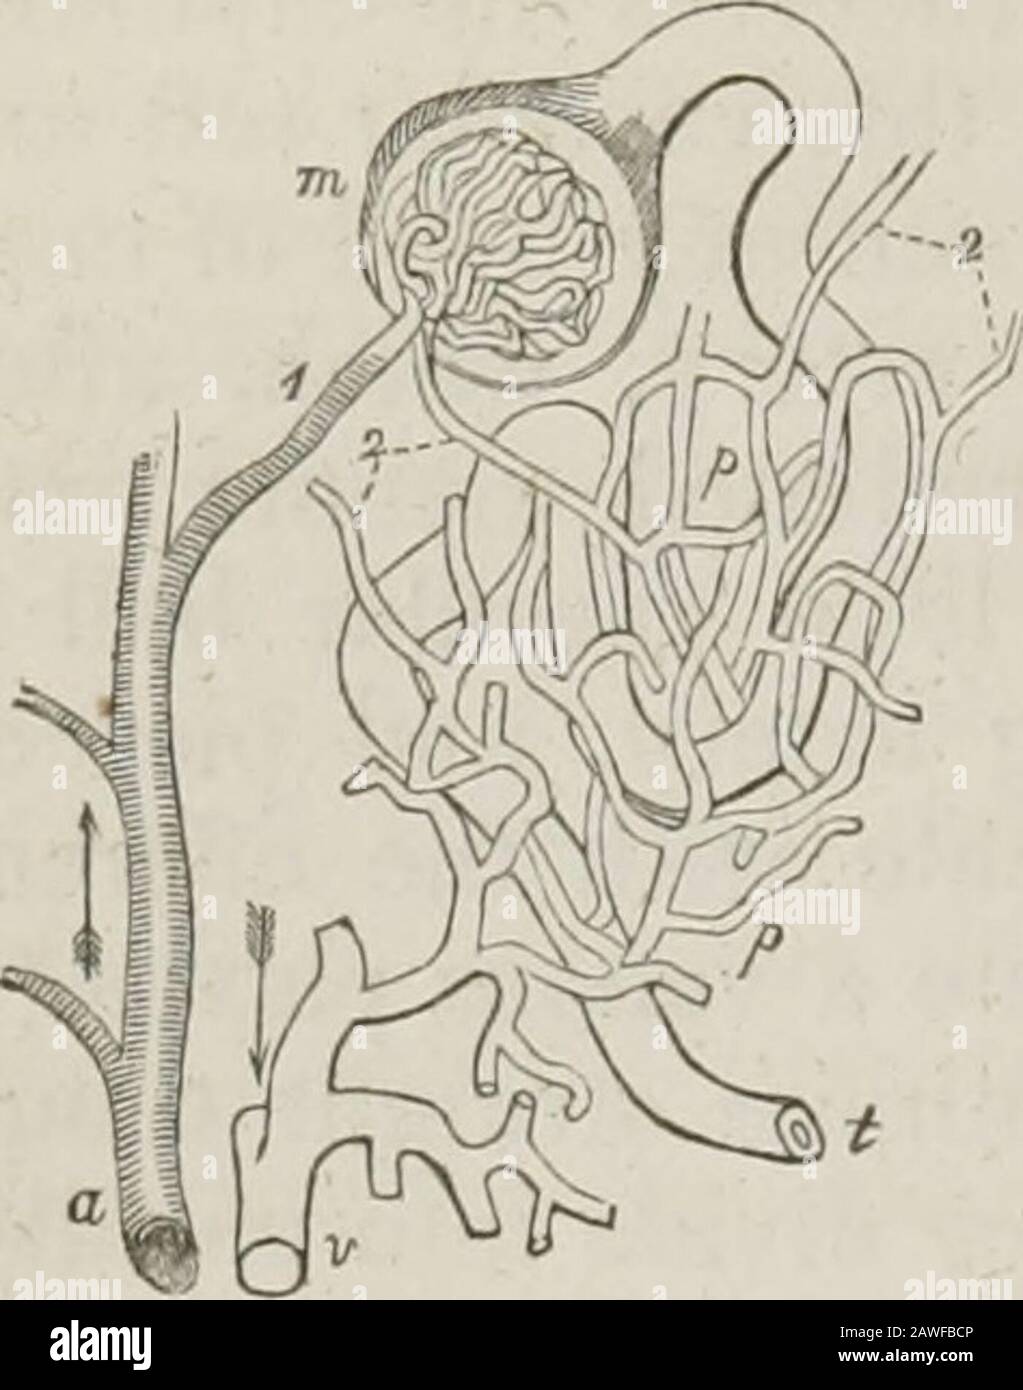 A system of human anatomy, general and special . metimestwo ureters to one kidney. The ureter, the pelvis, the infundibula,and the calices are composed of two coats, an external or fibrouscoat, the tunica propria; and an internal mucous coat, which is con-tinuous with the mucous membrane of the bladder inferiorly, andwith the tubuli uriniferi above. Vessels and Nerves.—The renal artery is derived from the aorta;it divides into several large branches before entering the hilus, andwithin the organ ramifies in an arborescent manner, terminating innutrient twigs, and in the small inferent vessels Stock Photo